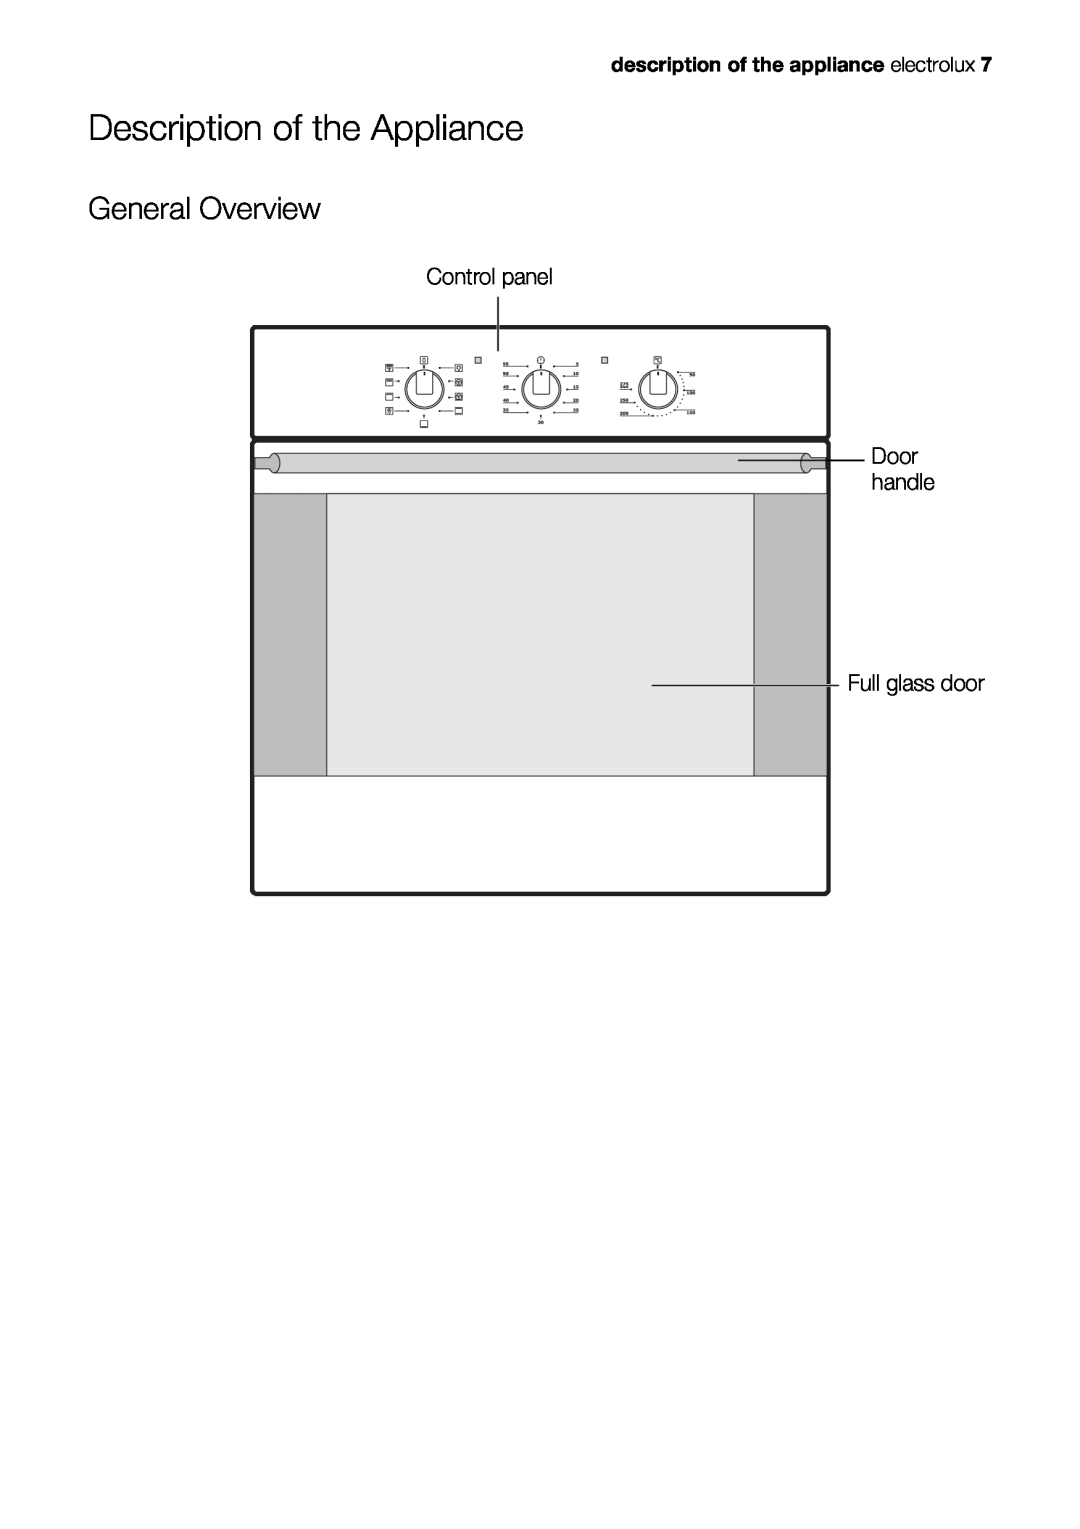 Electrolux EOB51000 user manual Description of the Appliance, General Overview 